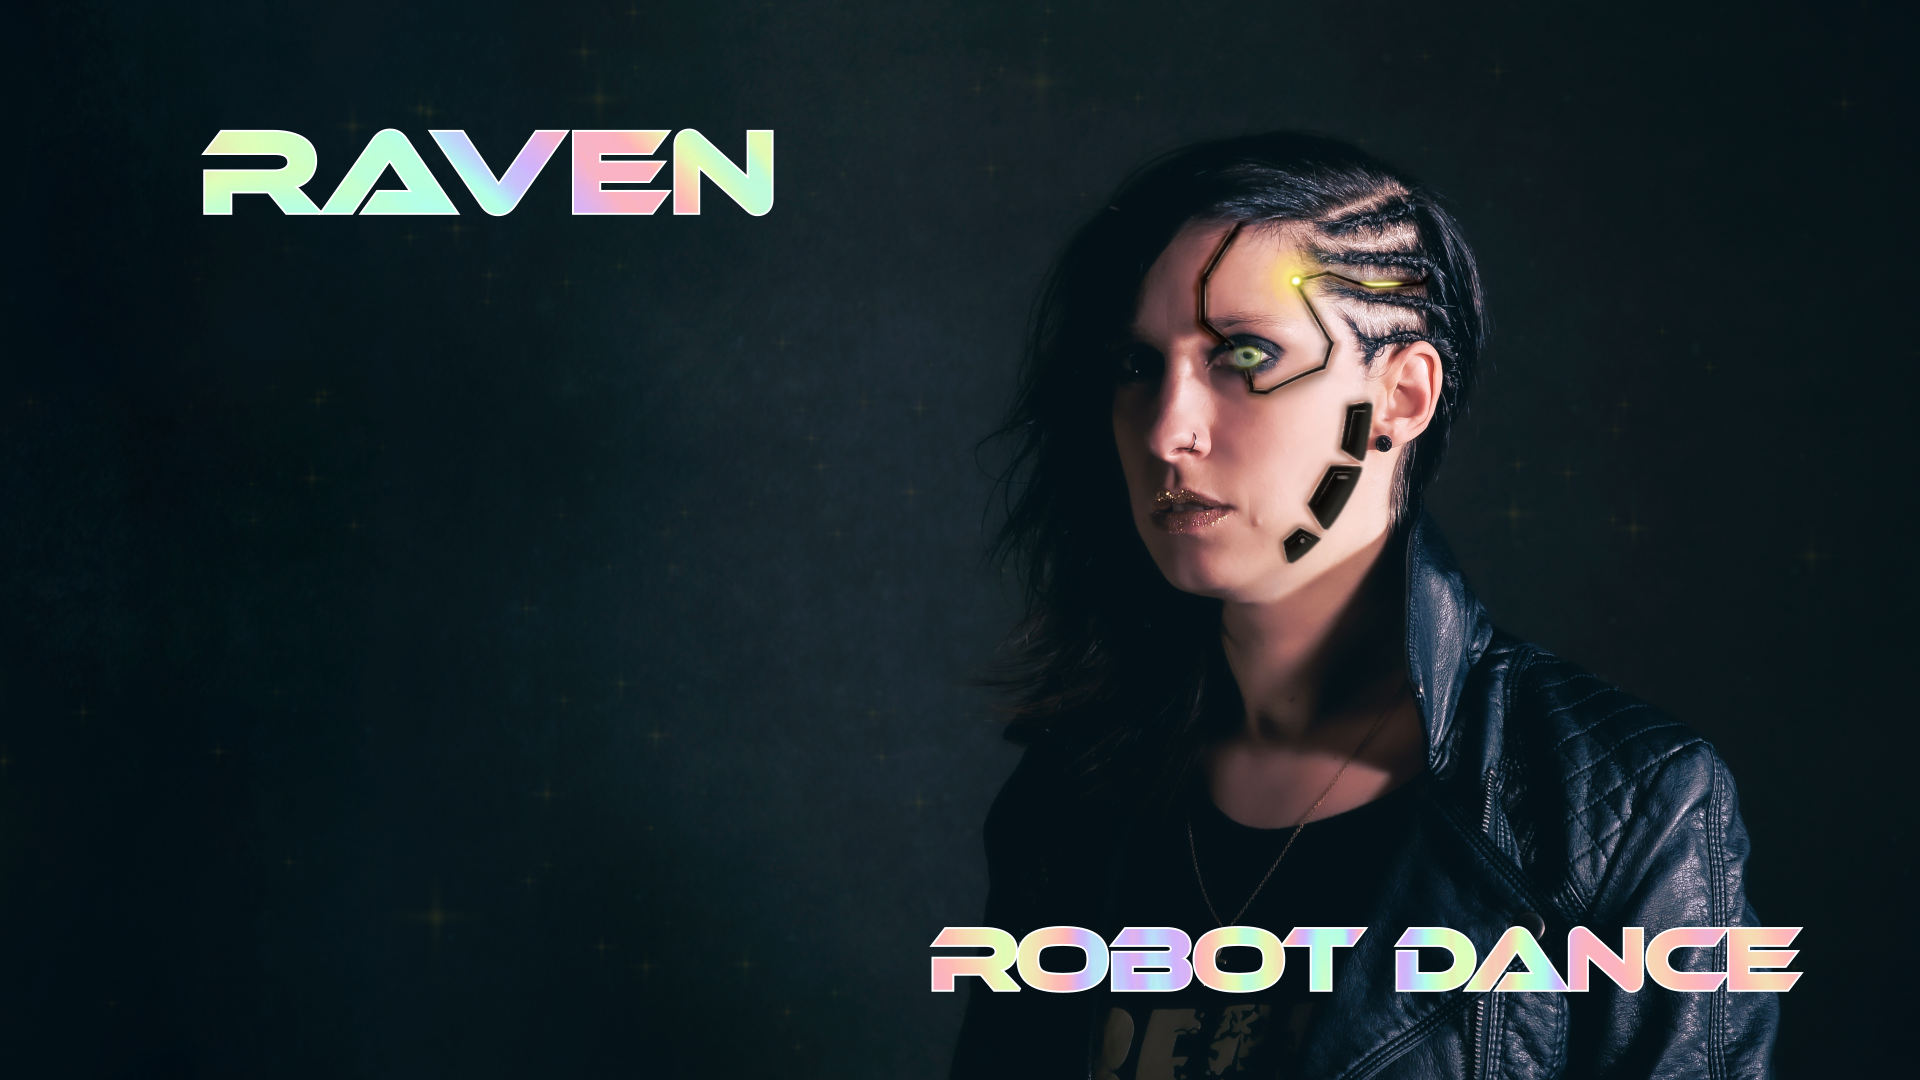 Raven - Robot Dance Coverart without Card.png